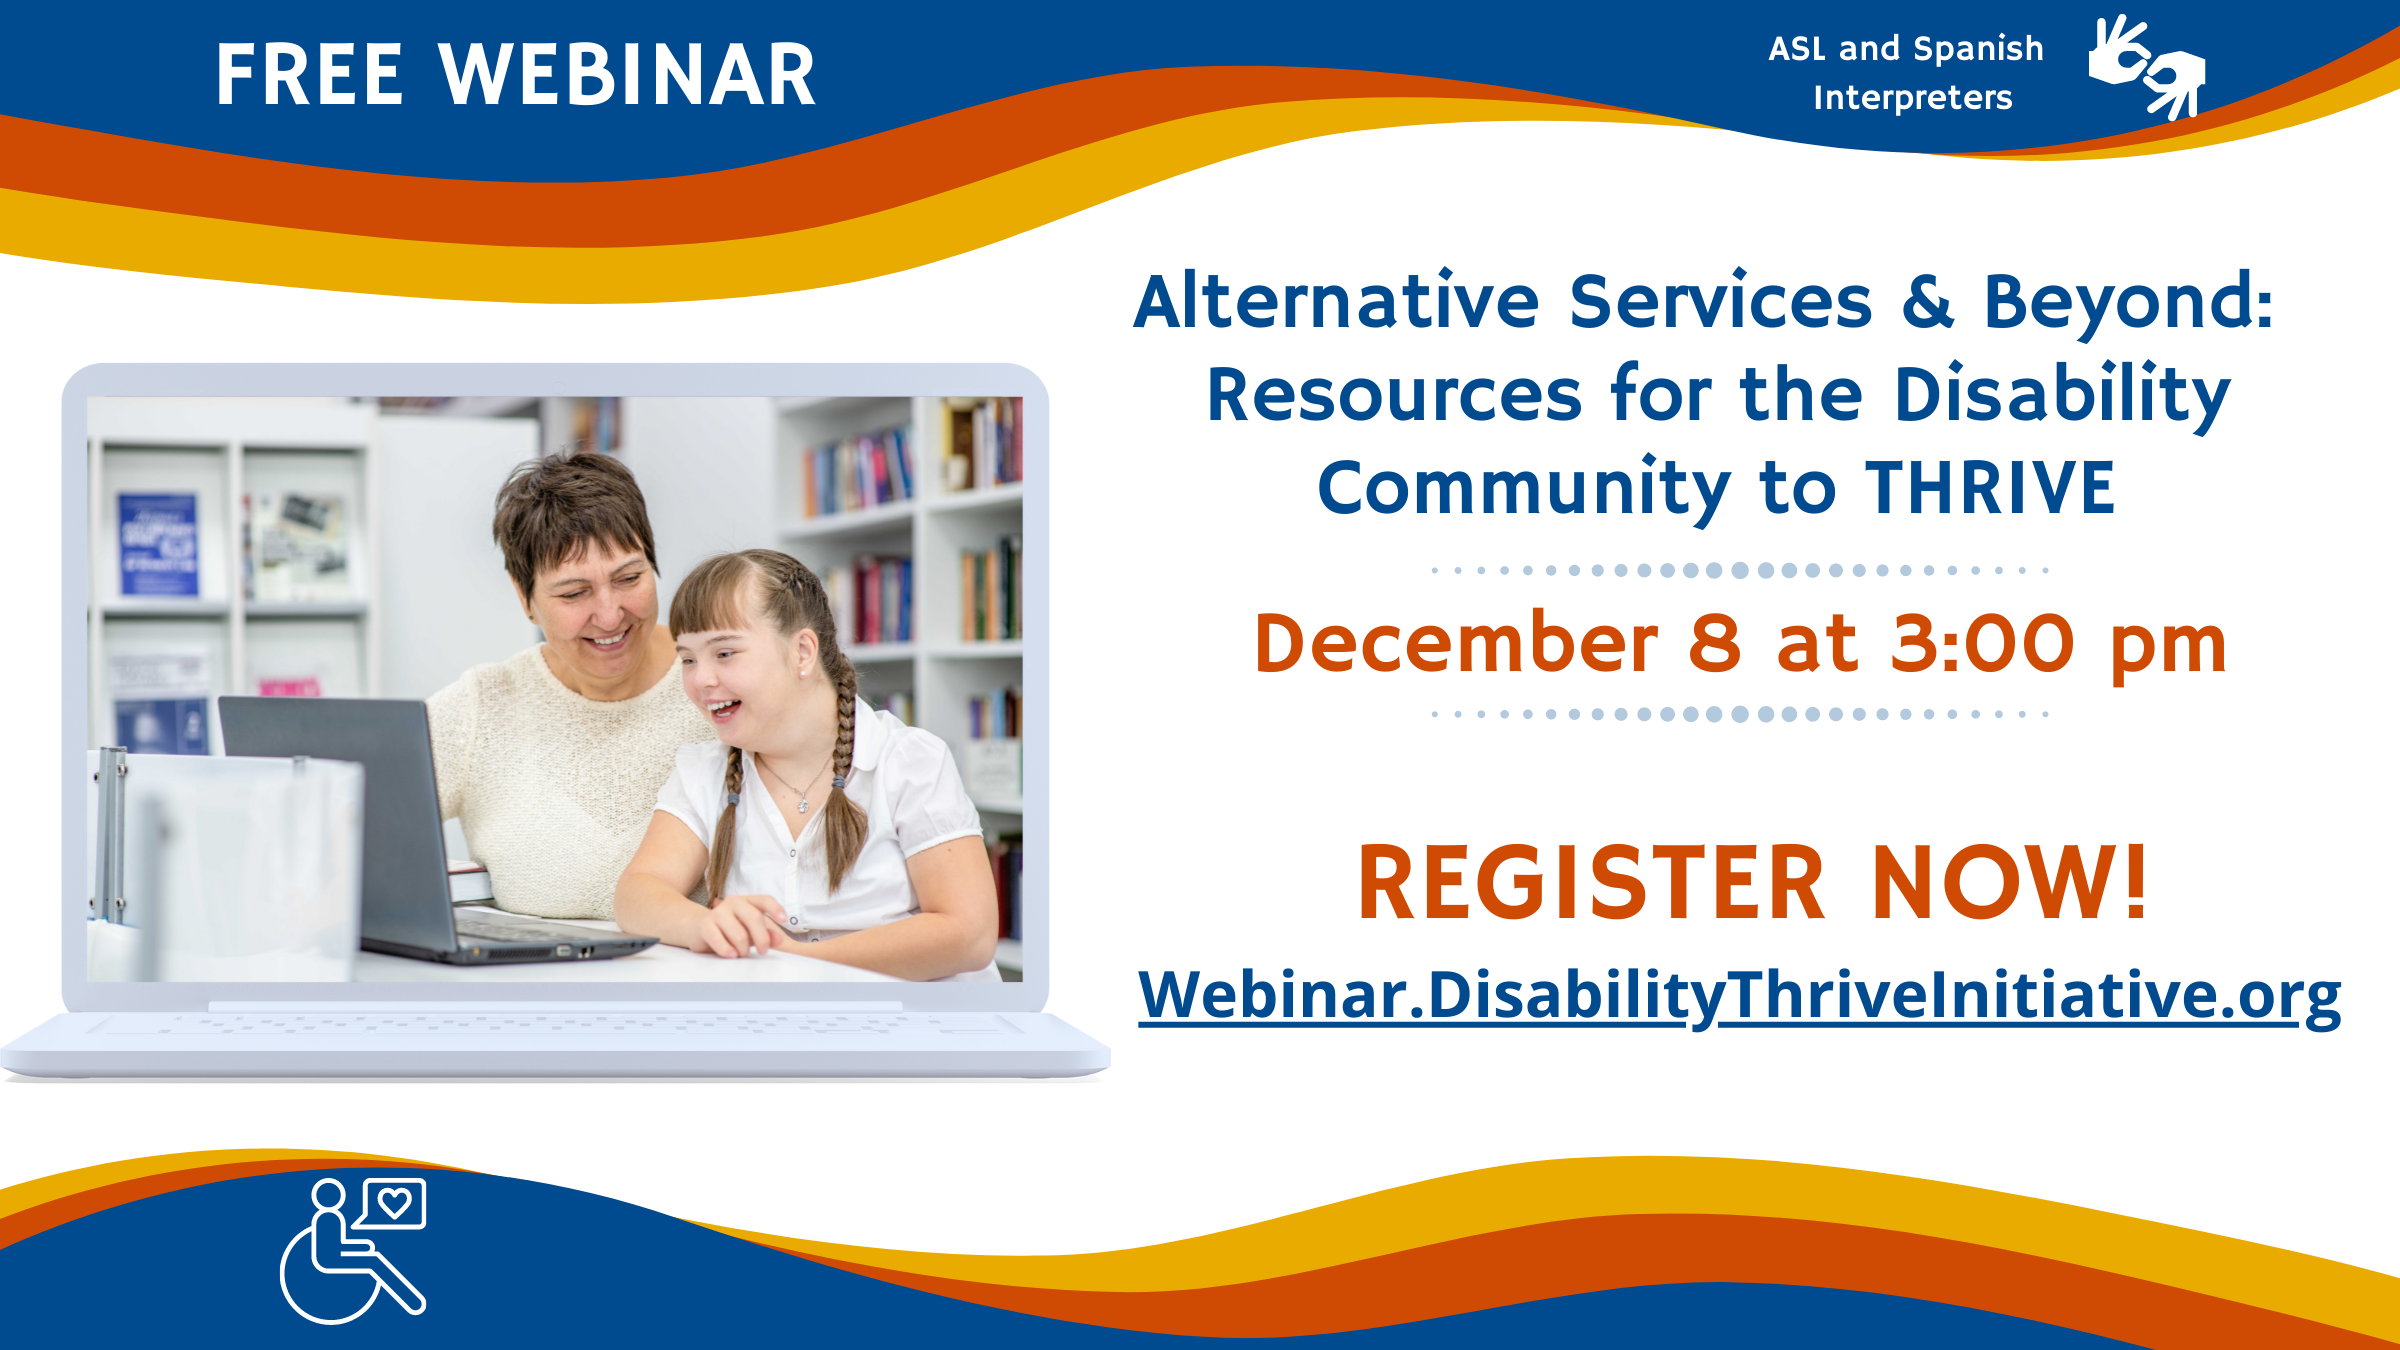 • Free Webinar. ASL and Spanish Interpreters. Wednesday, December 8, 2021 from 3 p.m. to 4:14 p.m. • Alternative Services & Beyond: Alternative Services & Beyond: Resources for the Disability Community to THRIVE • Register Now at webinar.disabilitythriveinitiative.org